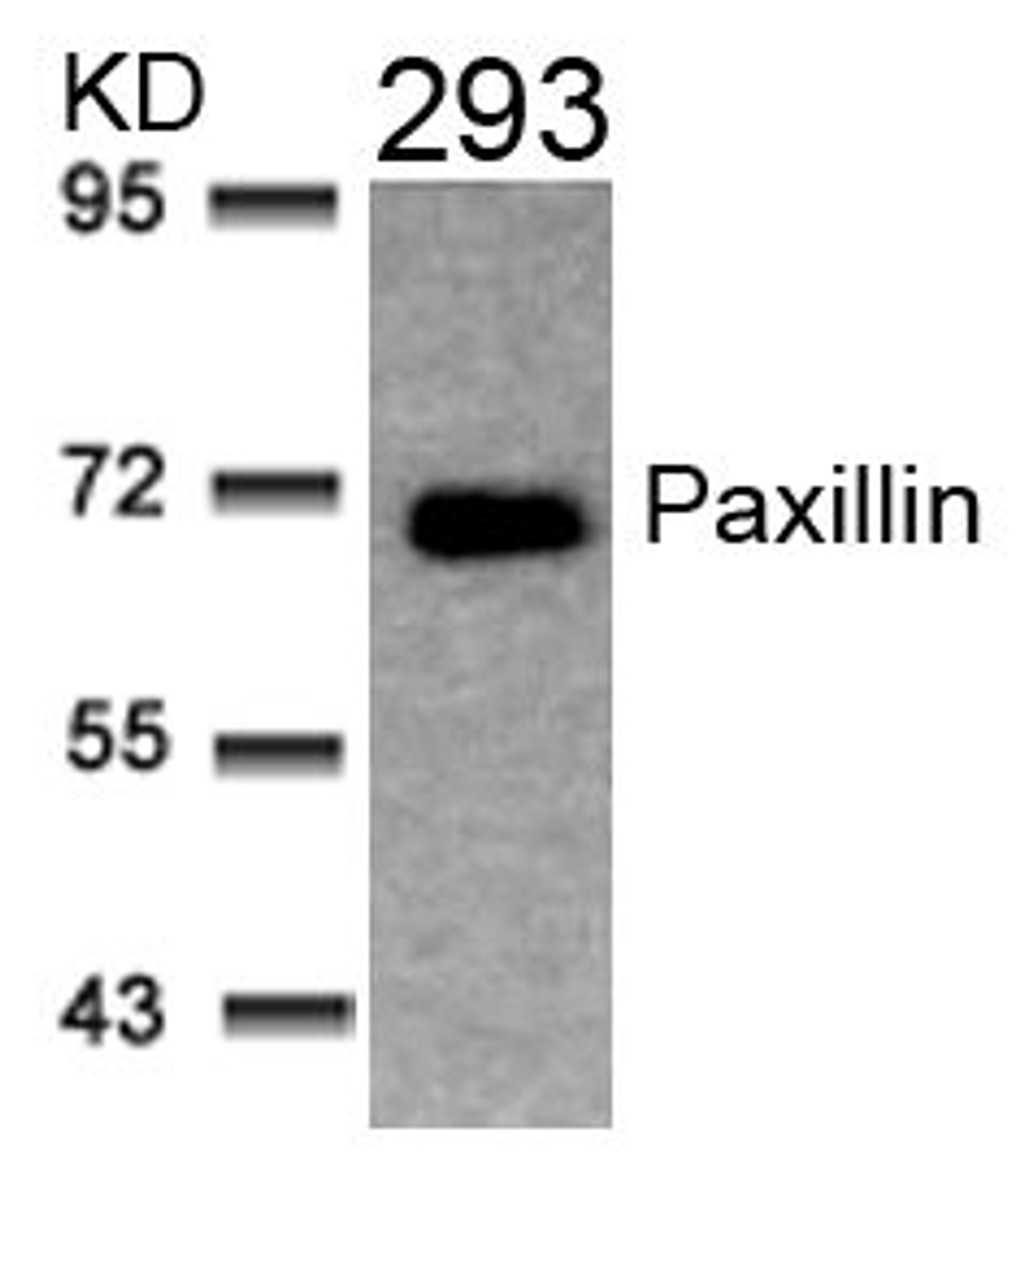 Western blot analysis of lysed extracts from 293 cells using Paxillin (Ab-31) .